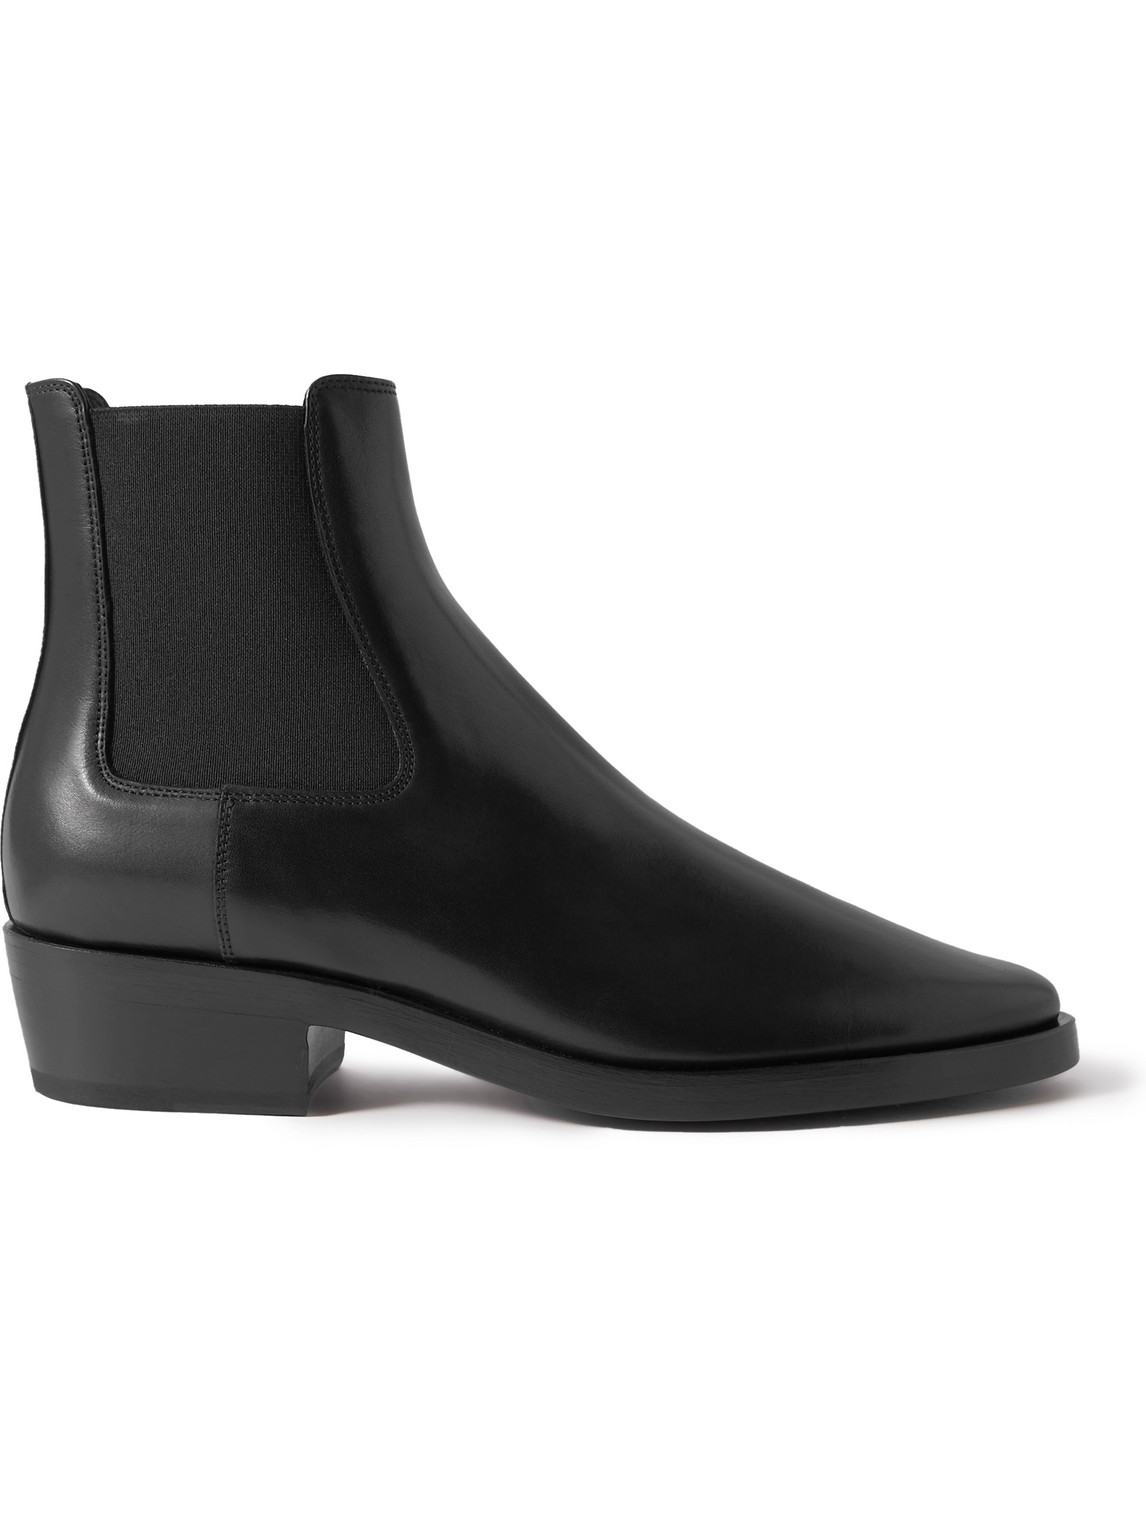 FEAR OF GOD ETERNAL LEATHER CHELSEA BOOTS